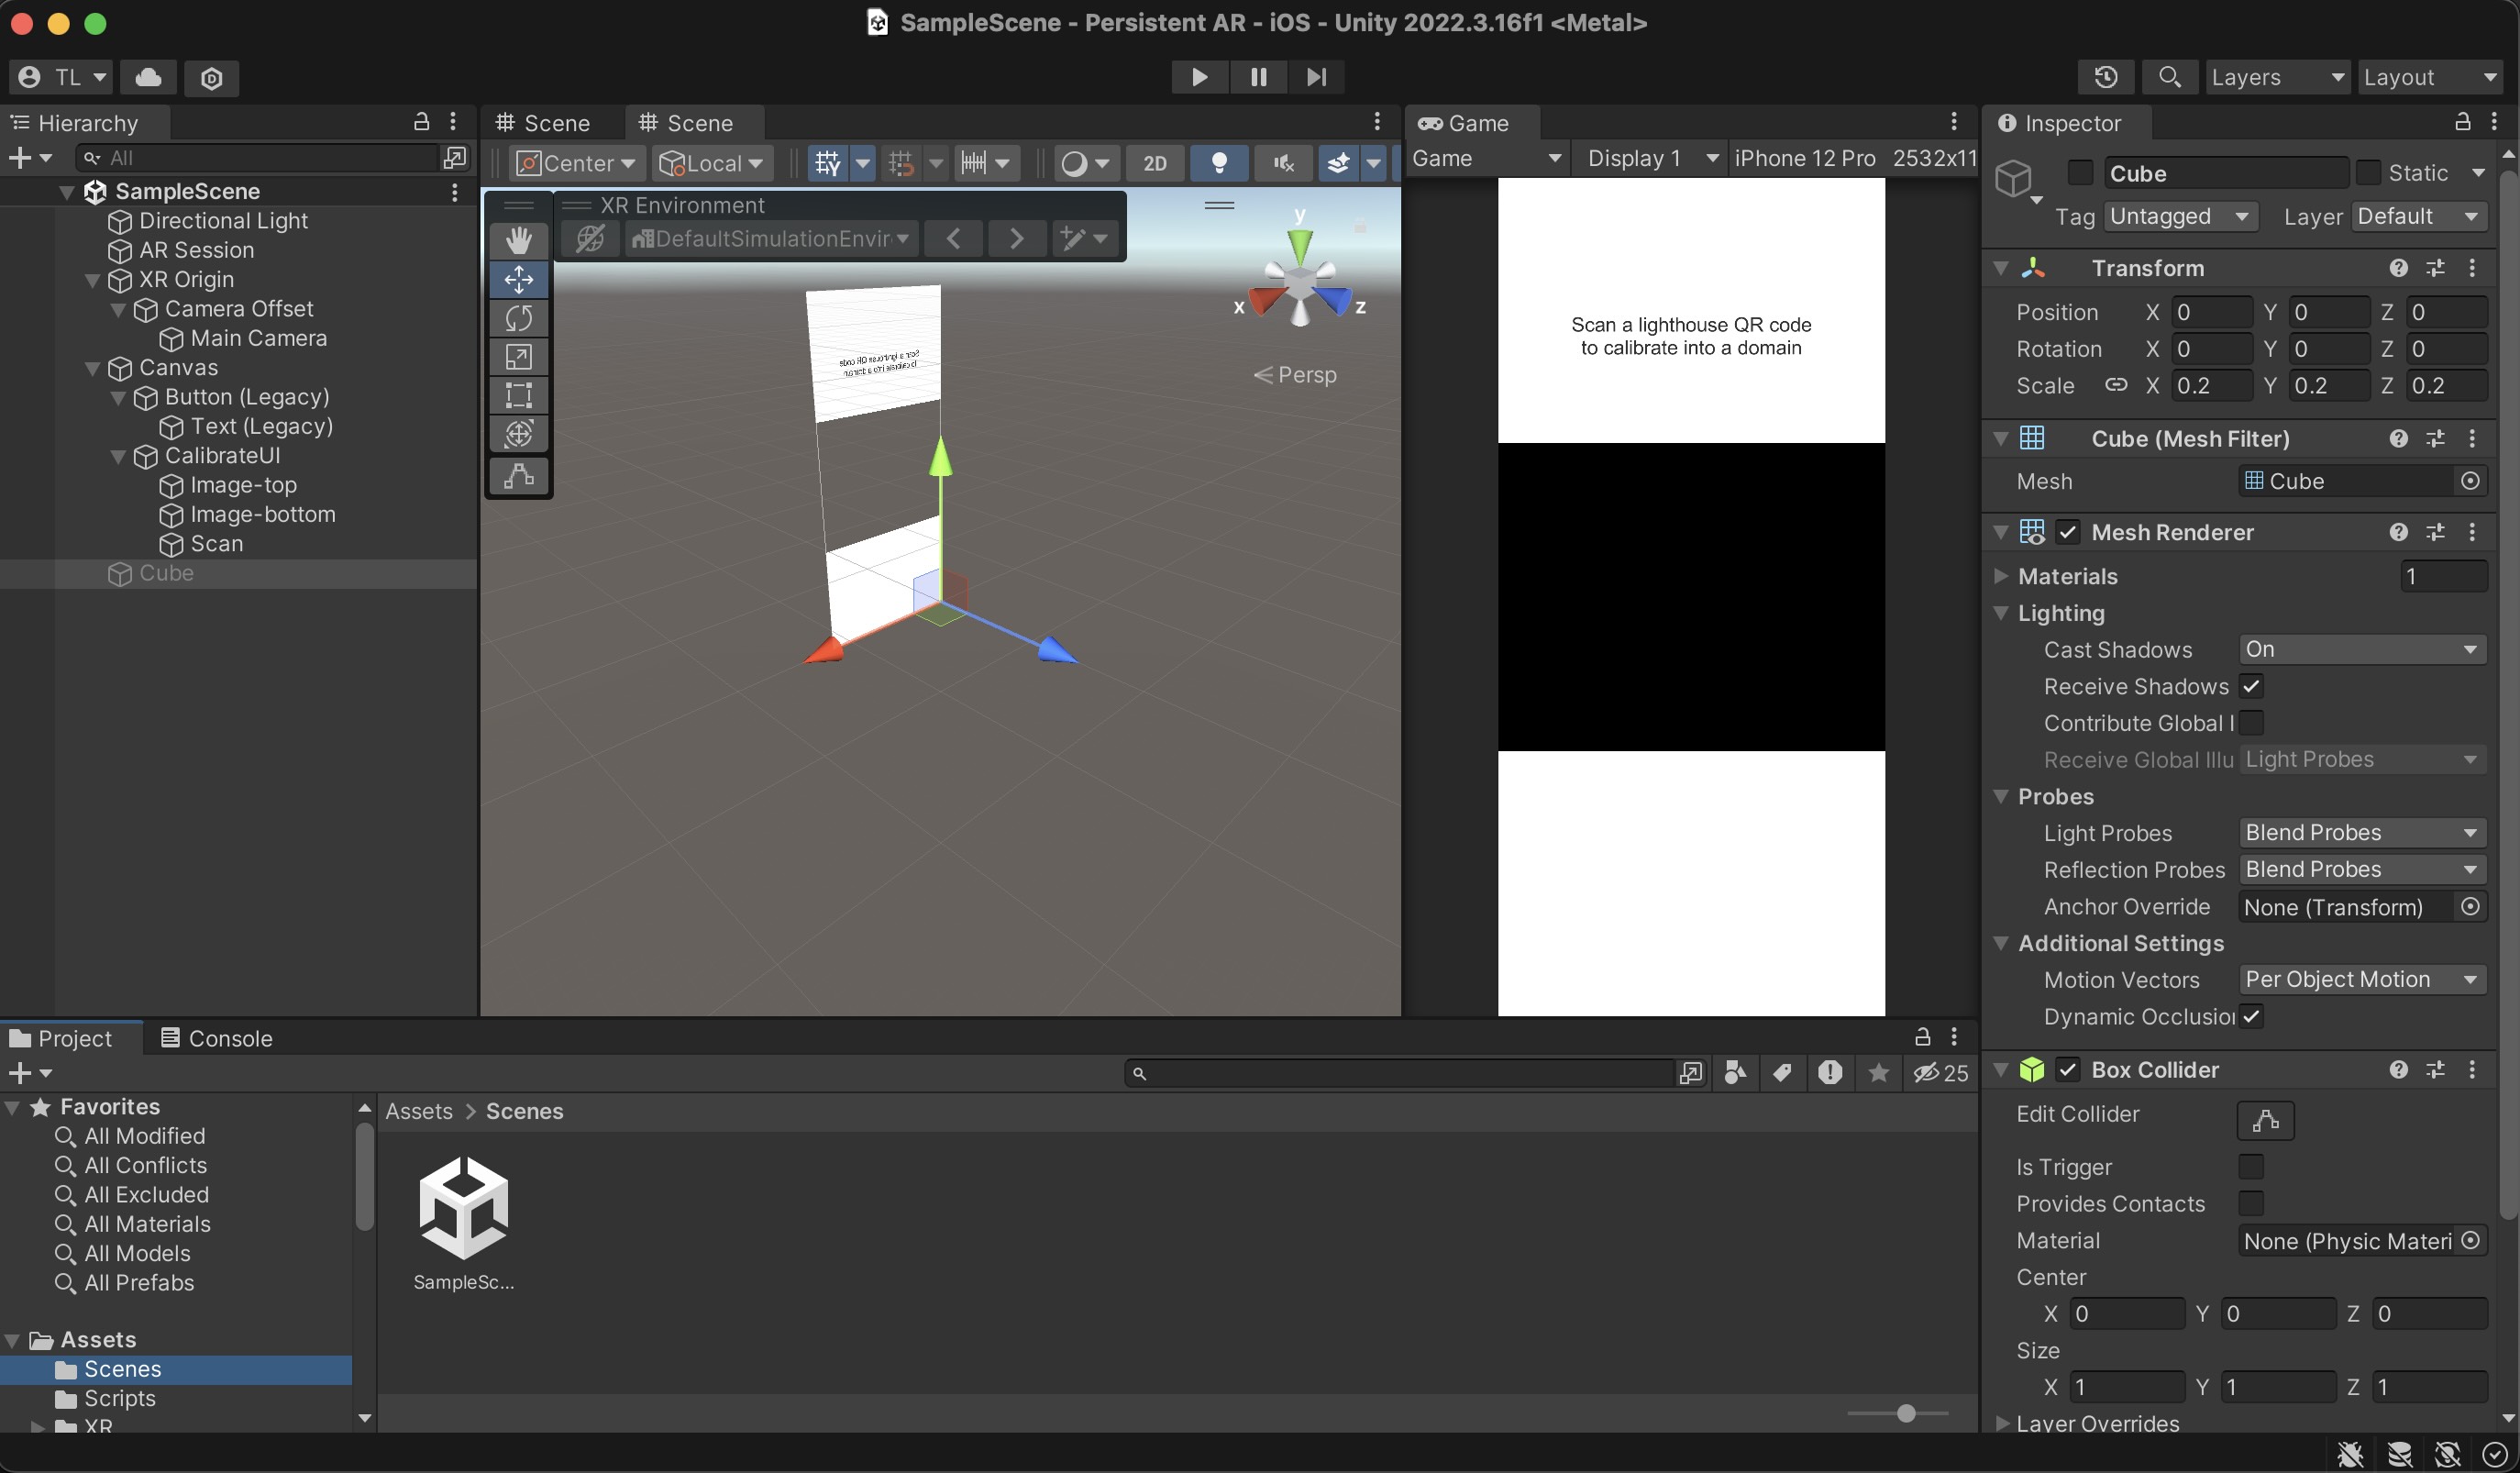 UI view in Unity